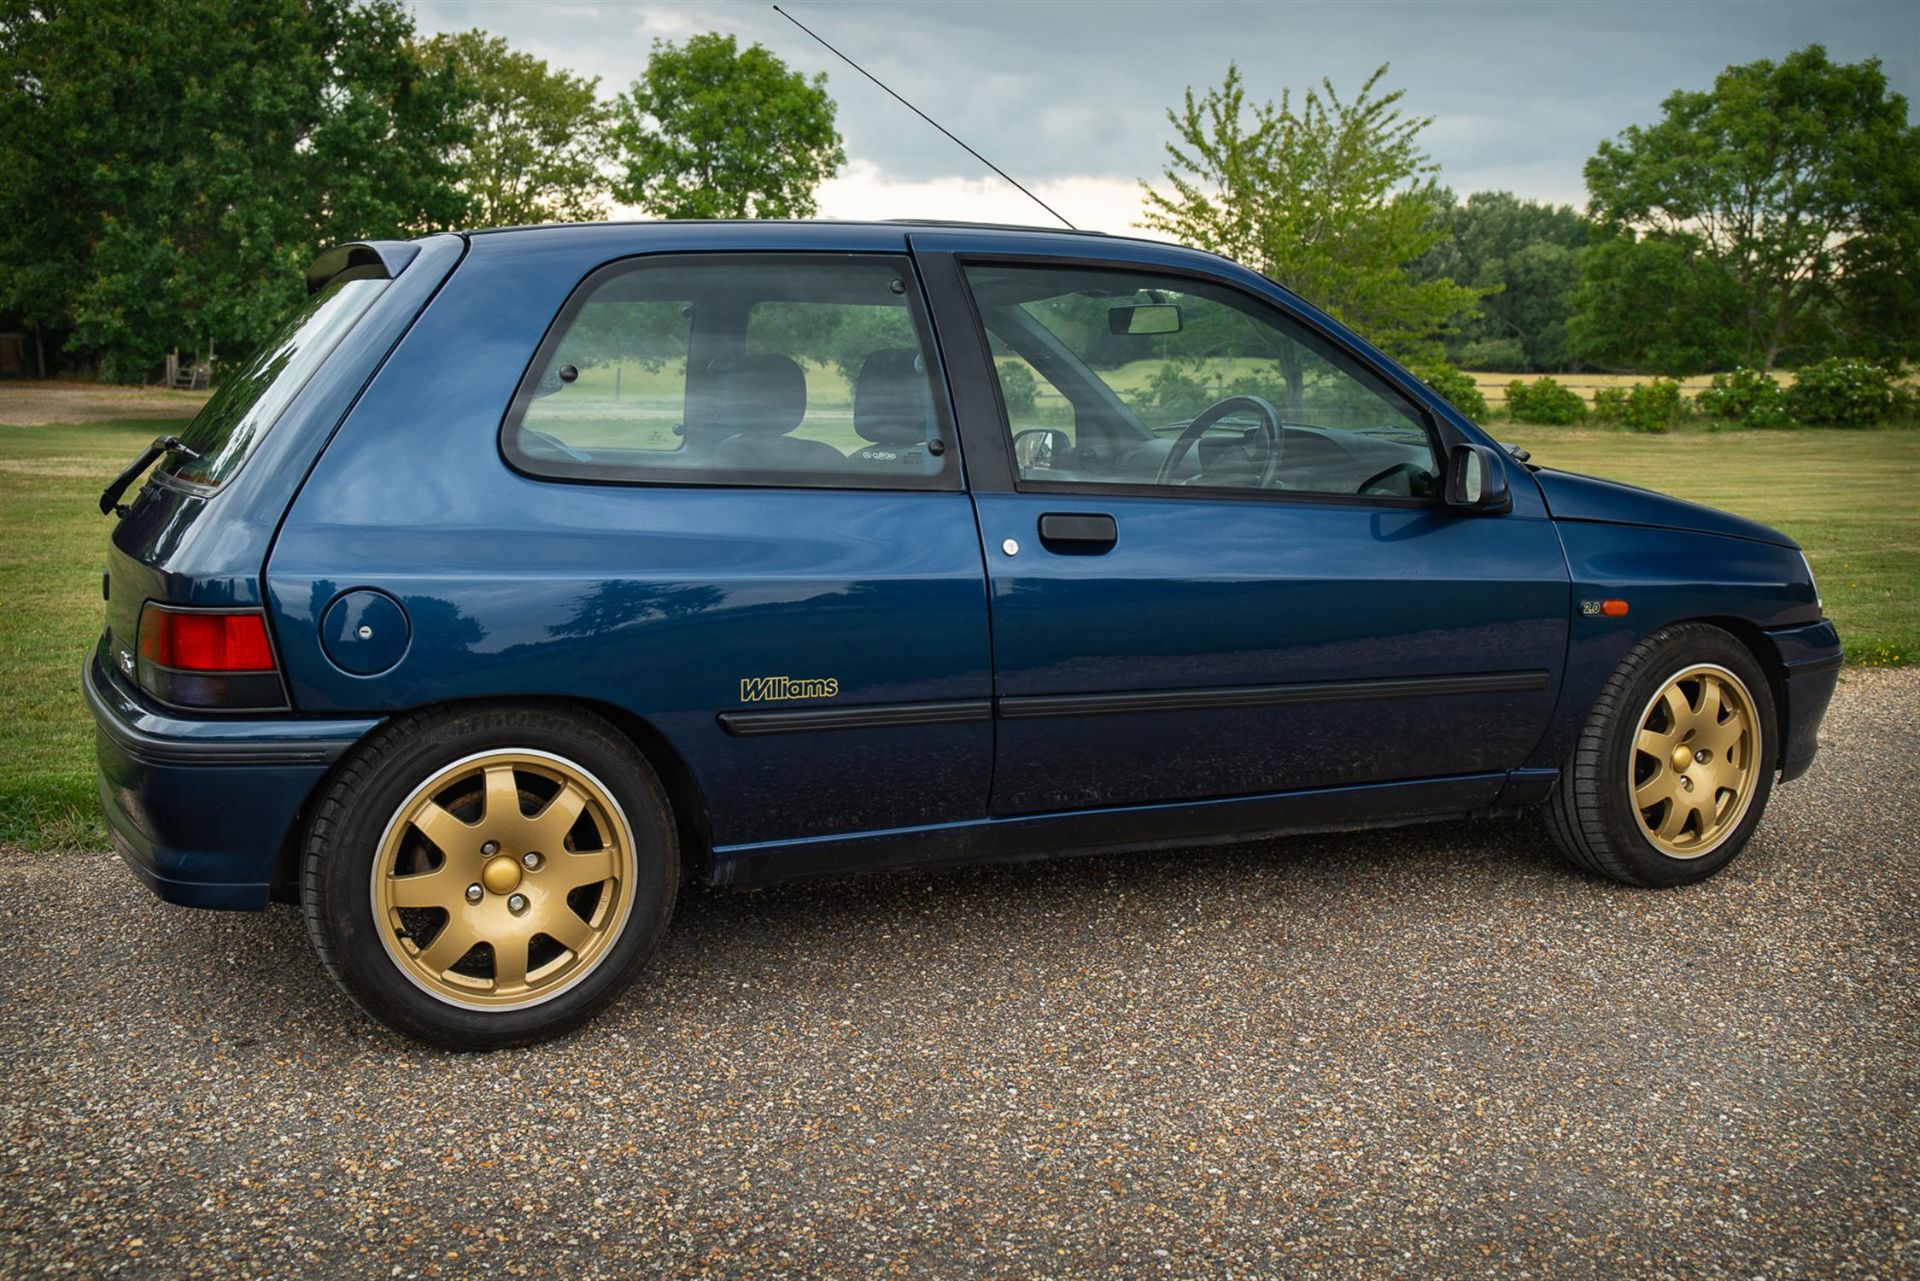 1994 Renault Clio Williams 1 (Phase One) #337 - Image 4 of 10